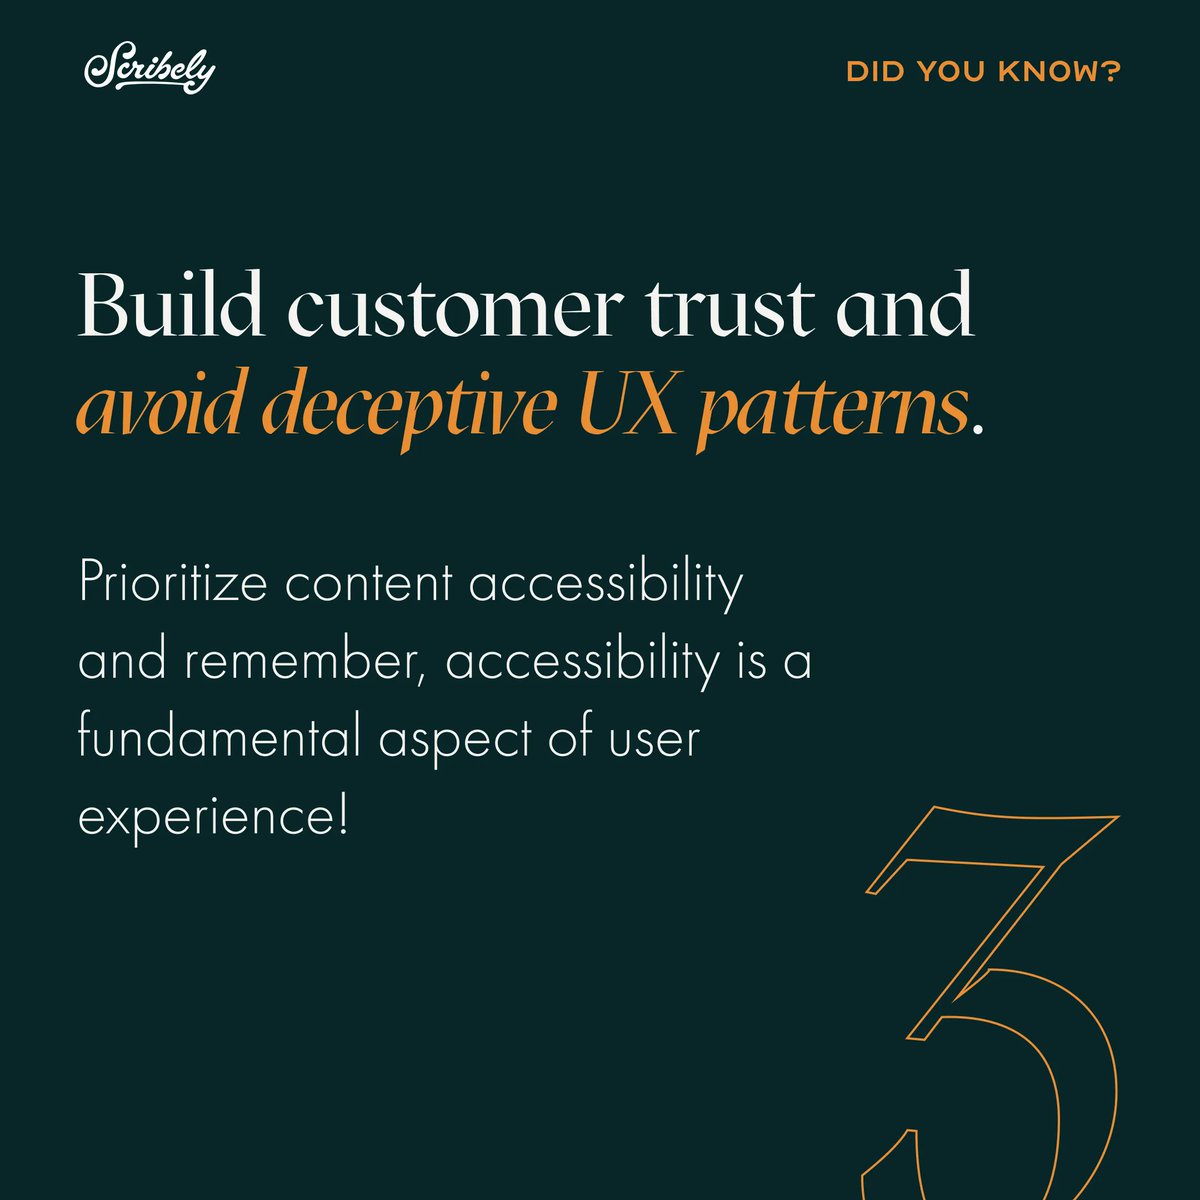 How do you build trust with your customers and avoid deceptive, inaccessible #UX patterns? Start by ensuring your content is honest, accessible, and able to be effectively communicated to all users. Prioritize #AccessibleContent like image alt text.